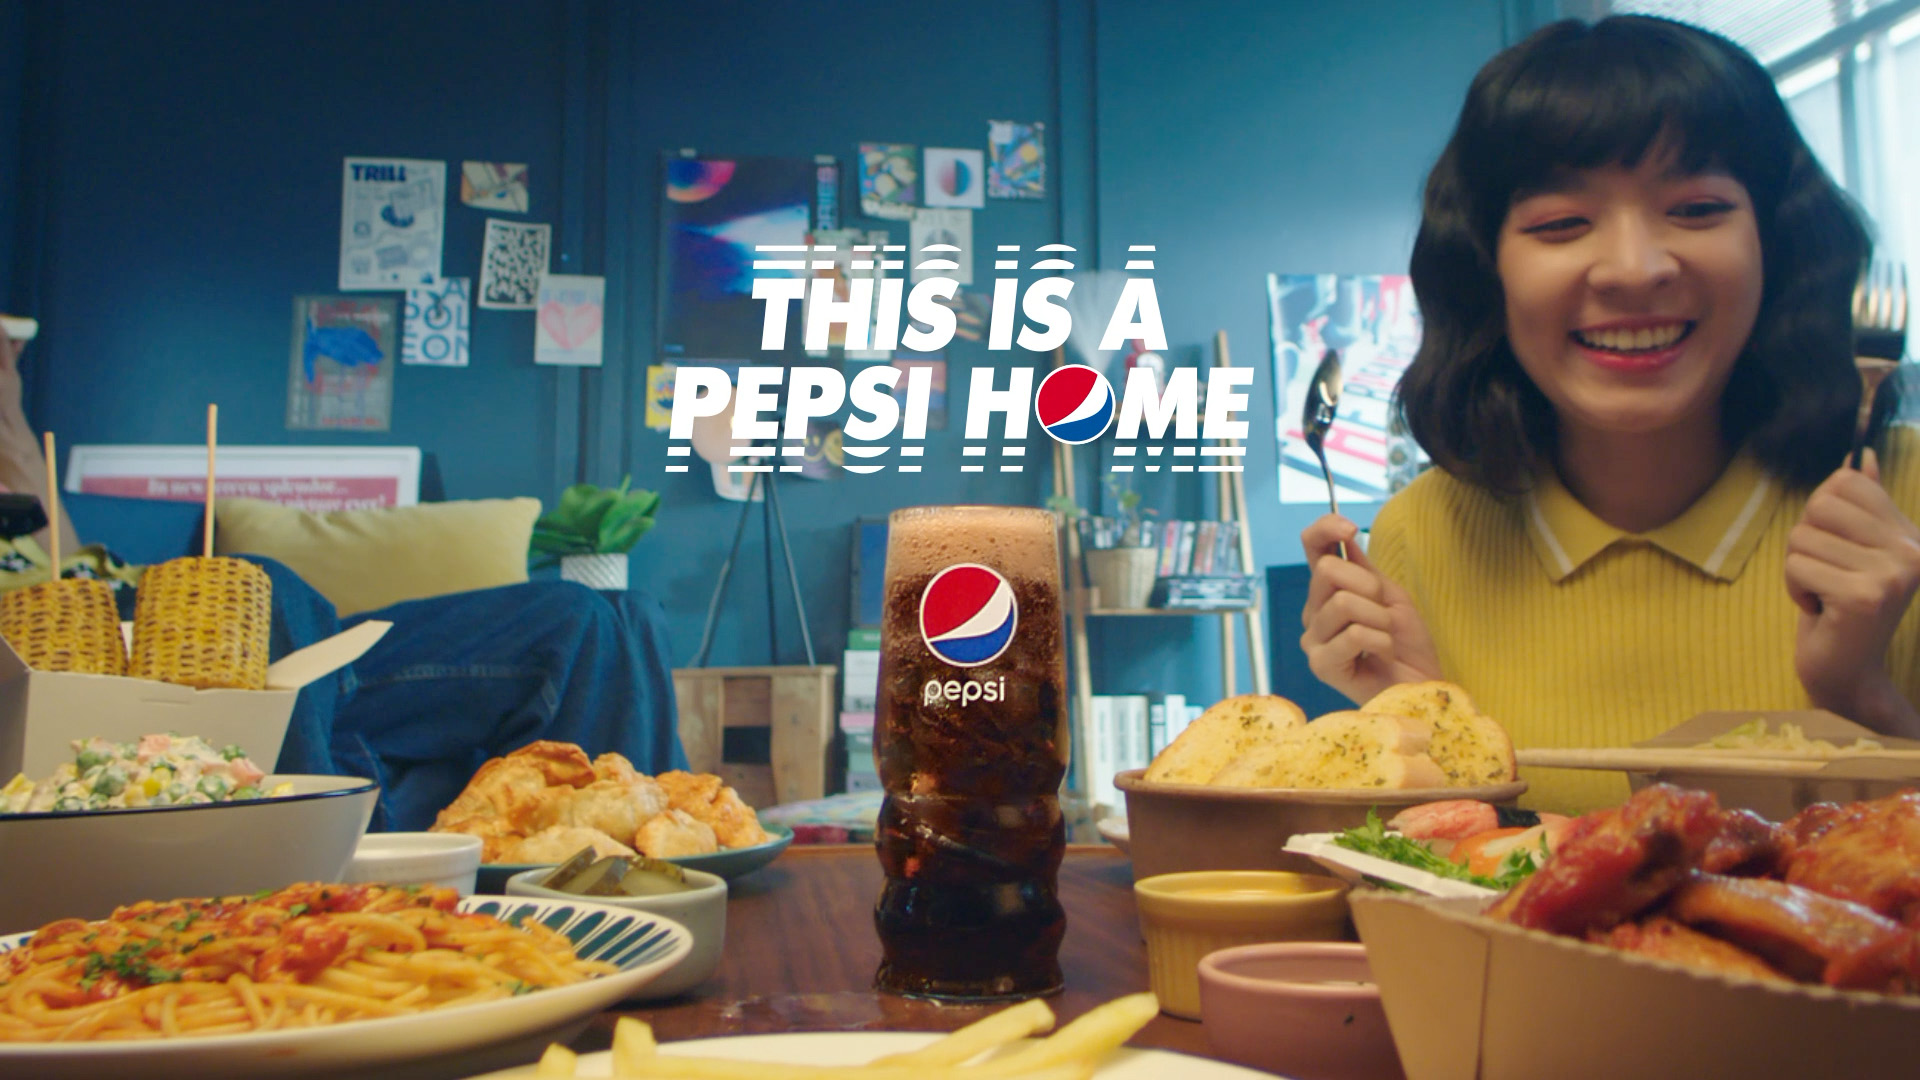 Pepsi_This-is-a-pepsi-home-16